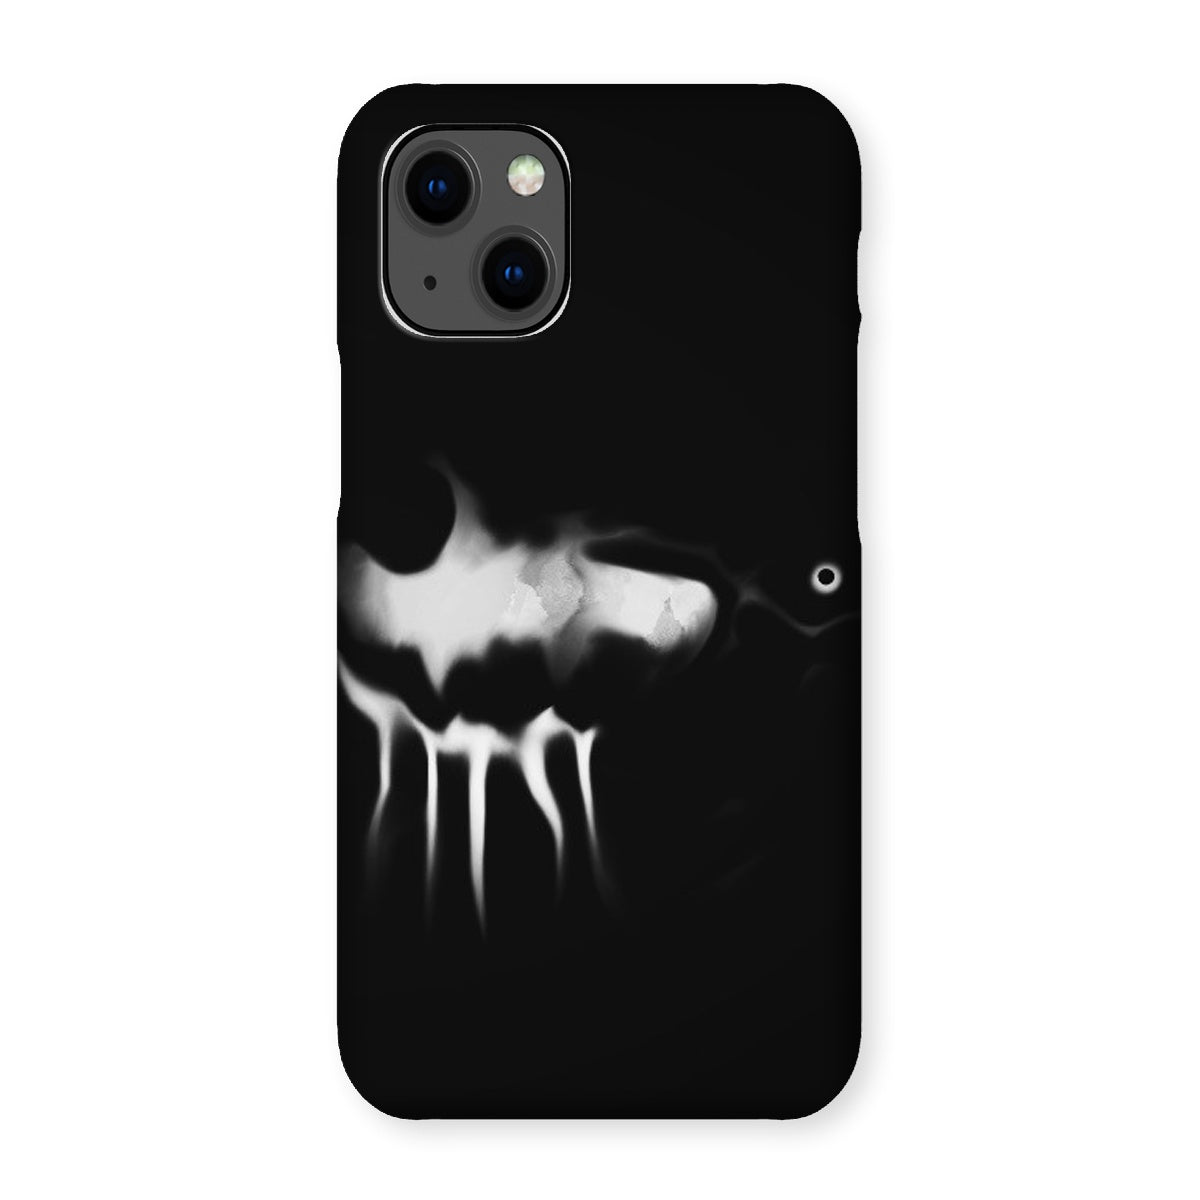 Waiting For You Snap Phone Case